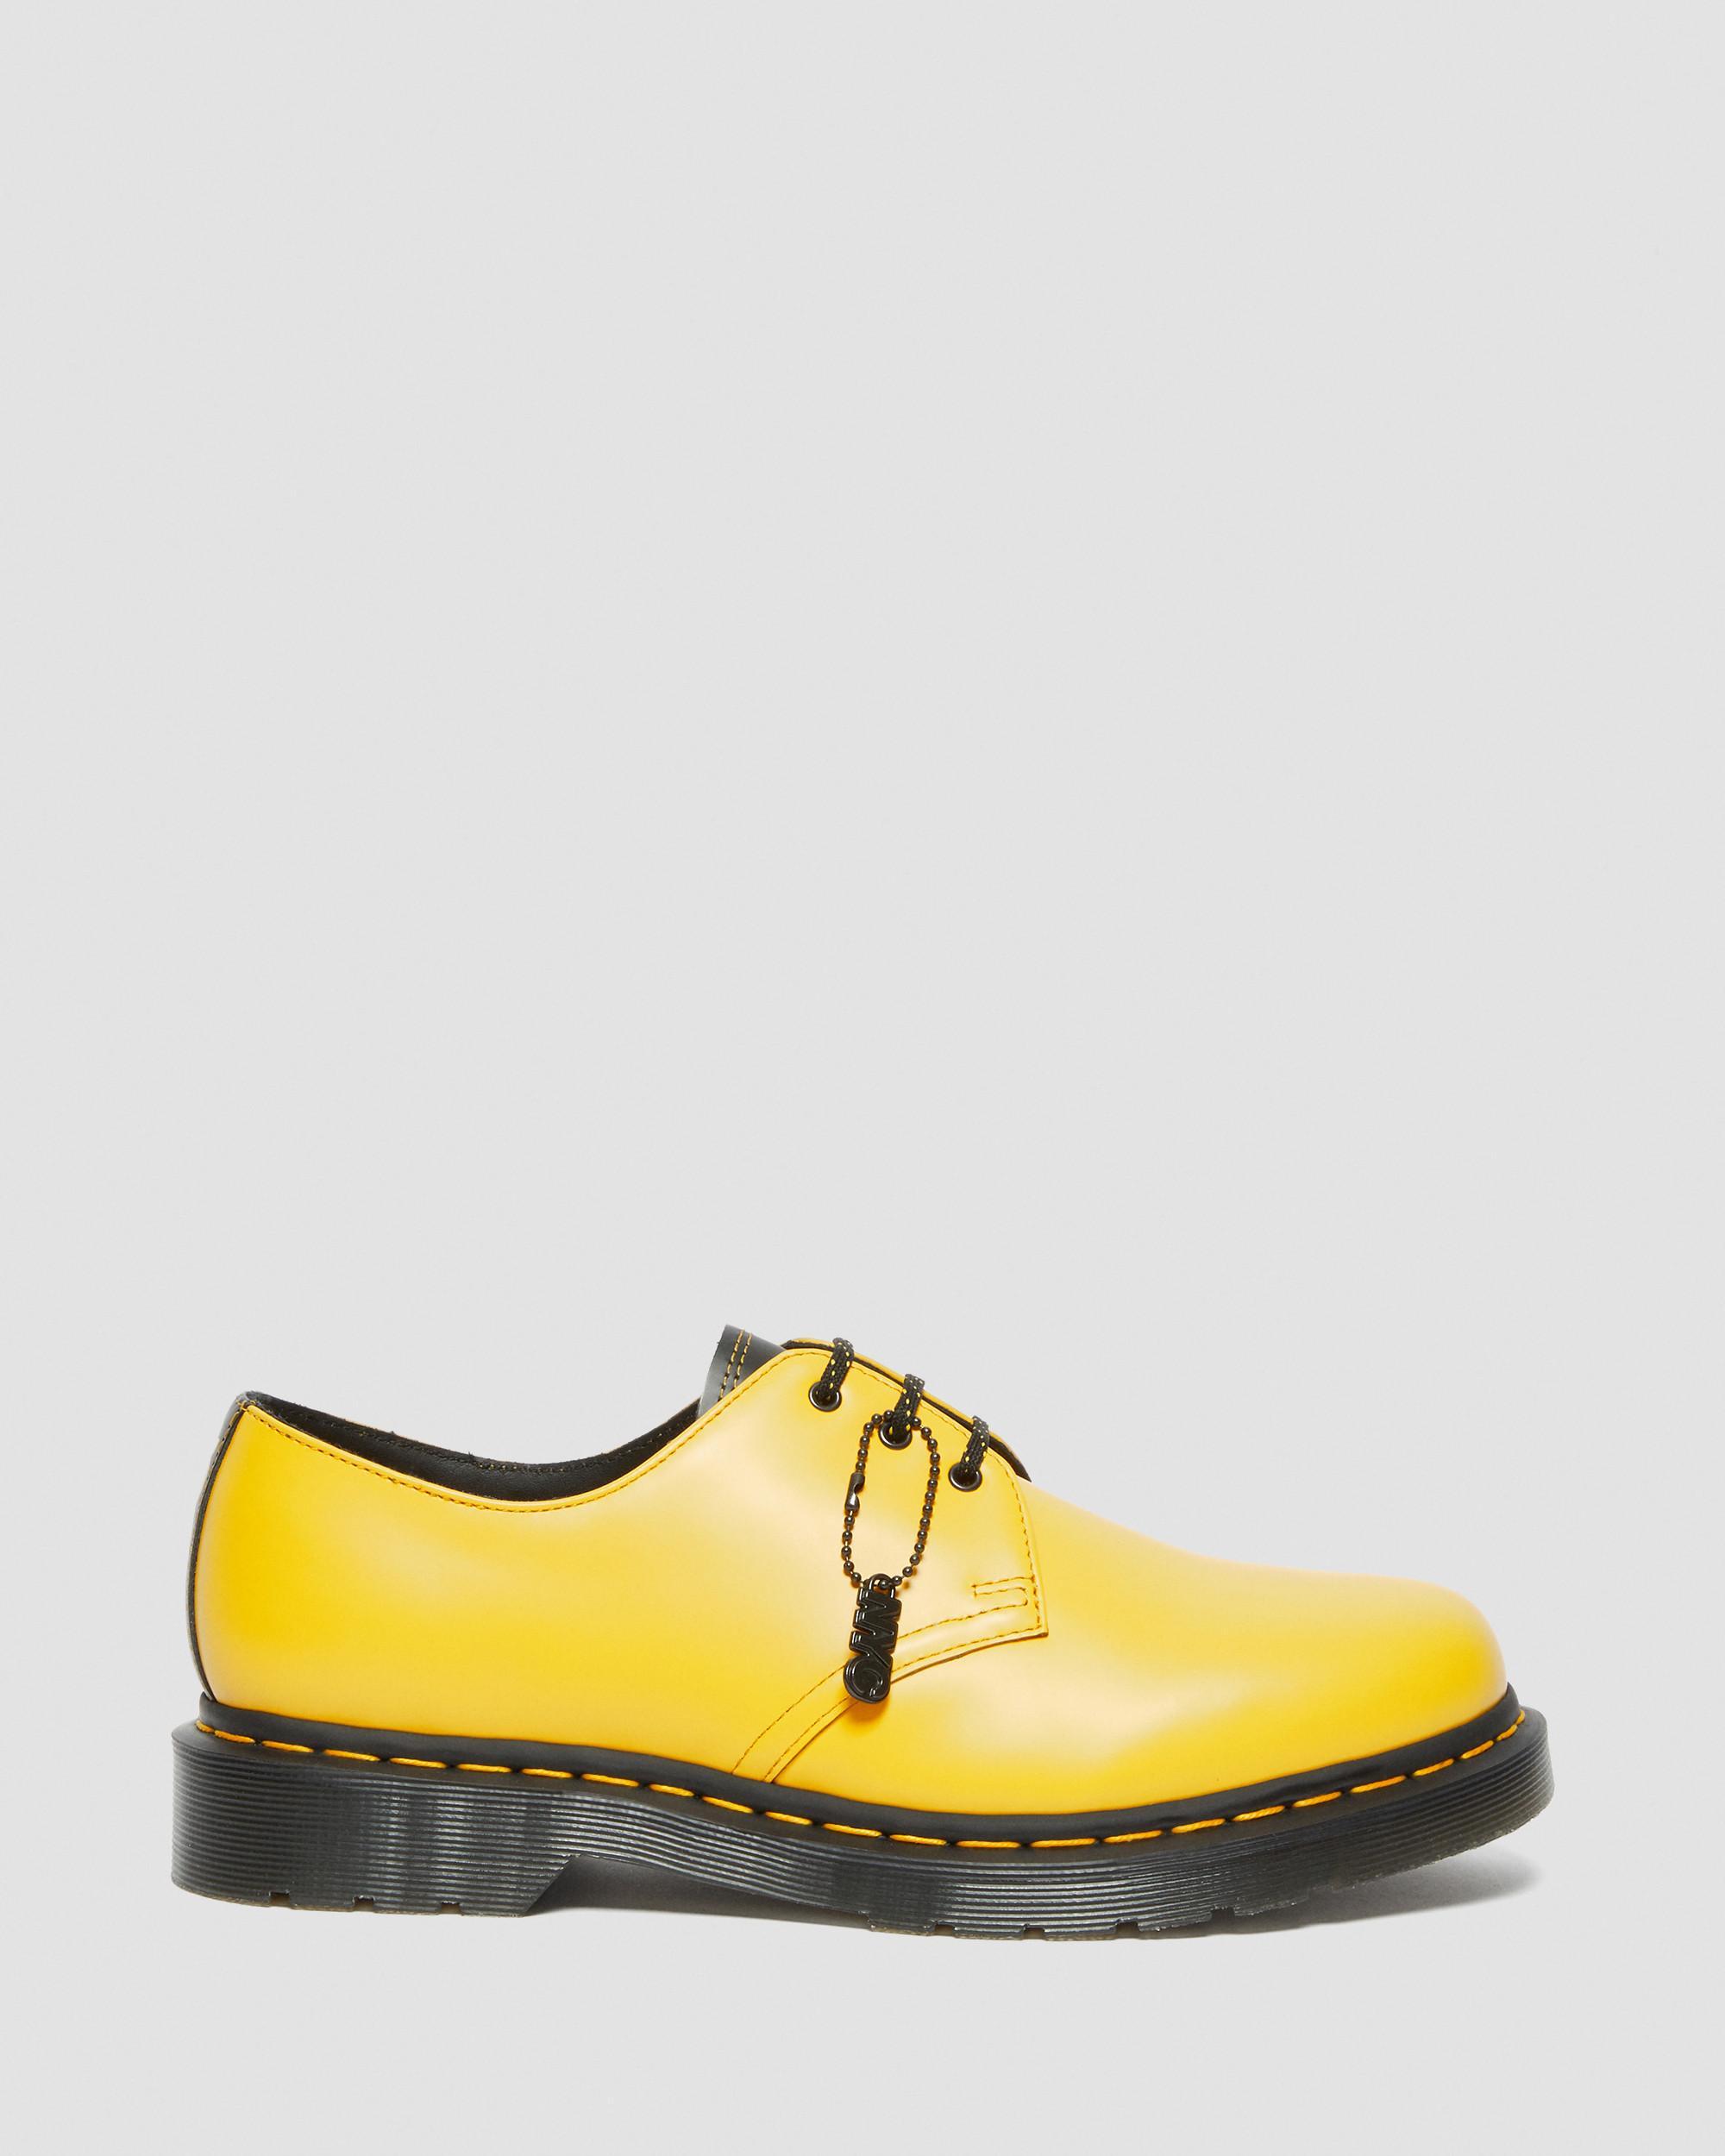 Dr. Martens 1461 New York City Smooth Leather Oxford Shoes in Yellow | Lyst